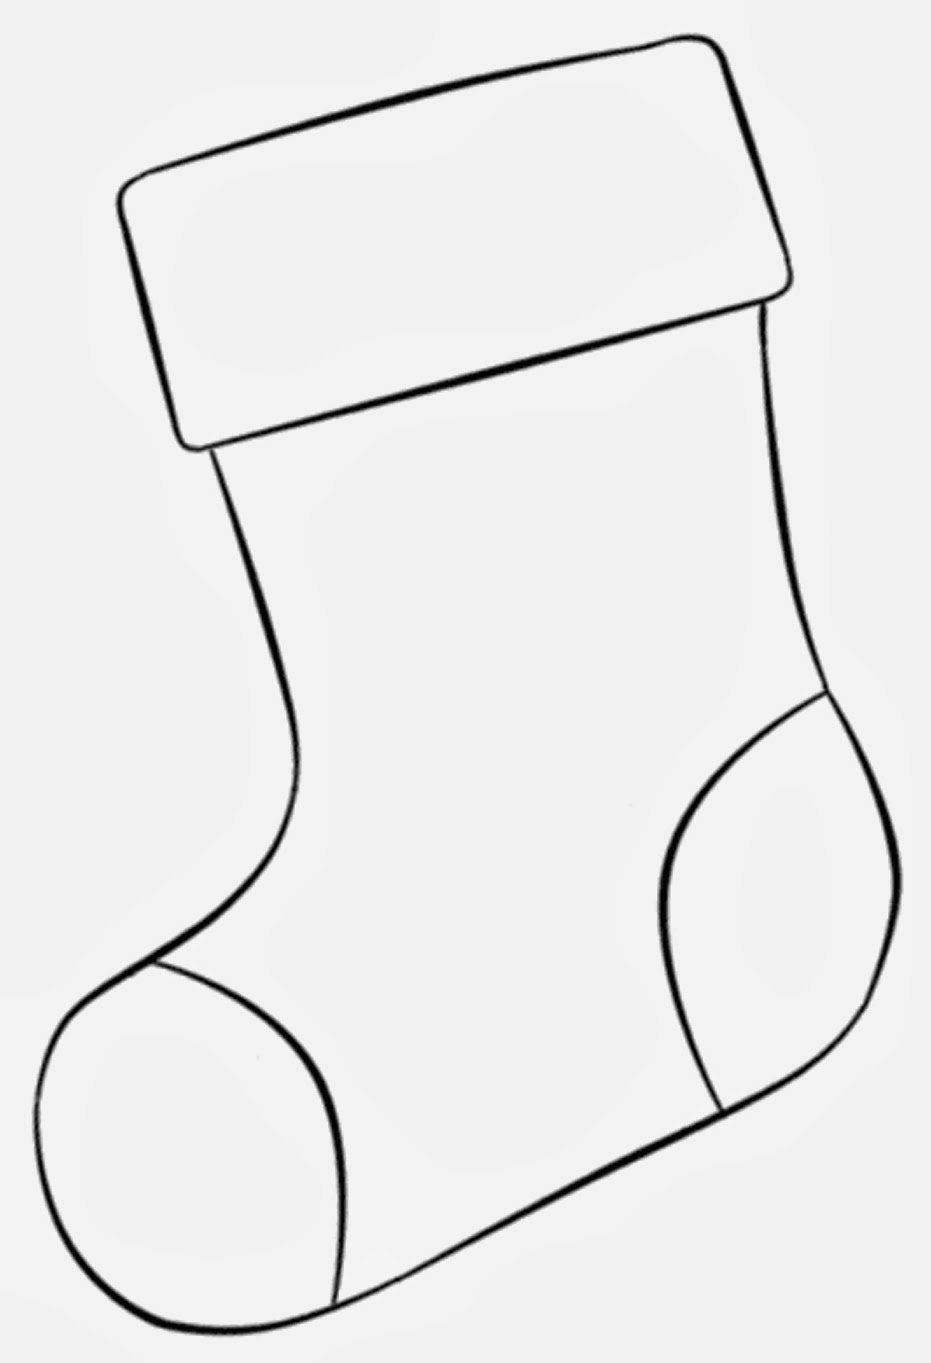 Stuffed Stockings Coloring Pages Learny Kids